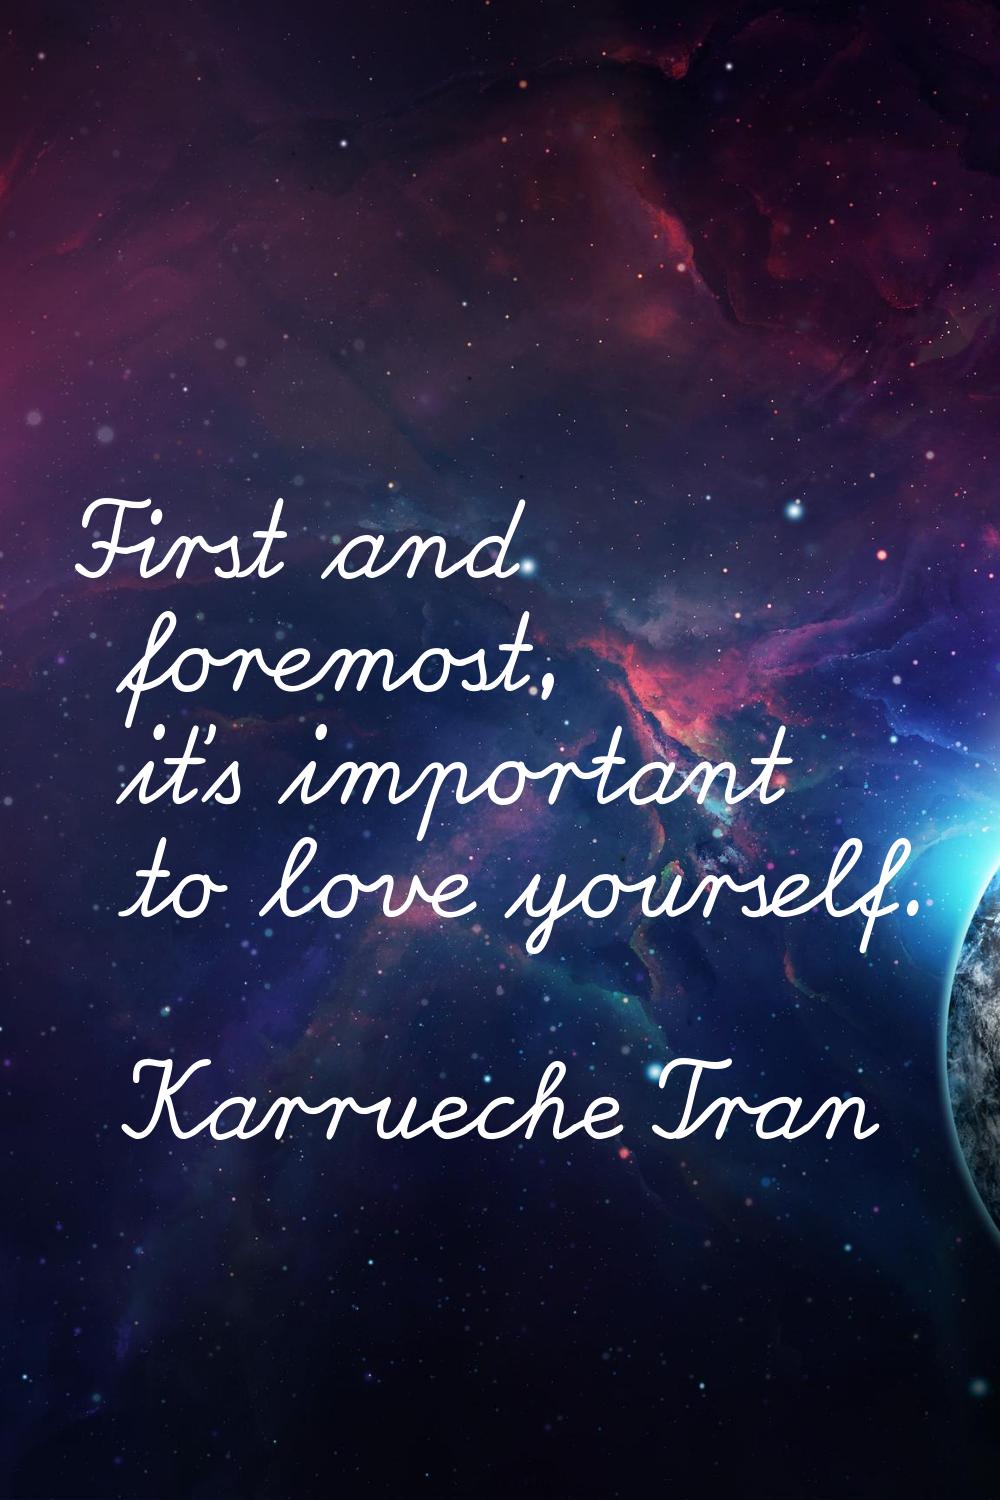 First and foremost, it's important to love yourself.